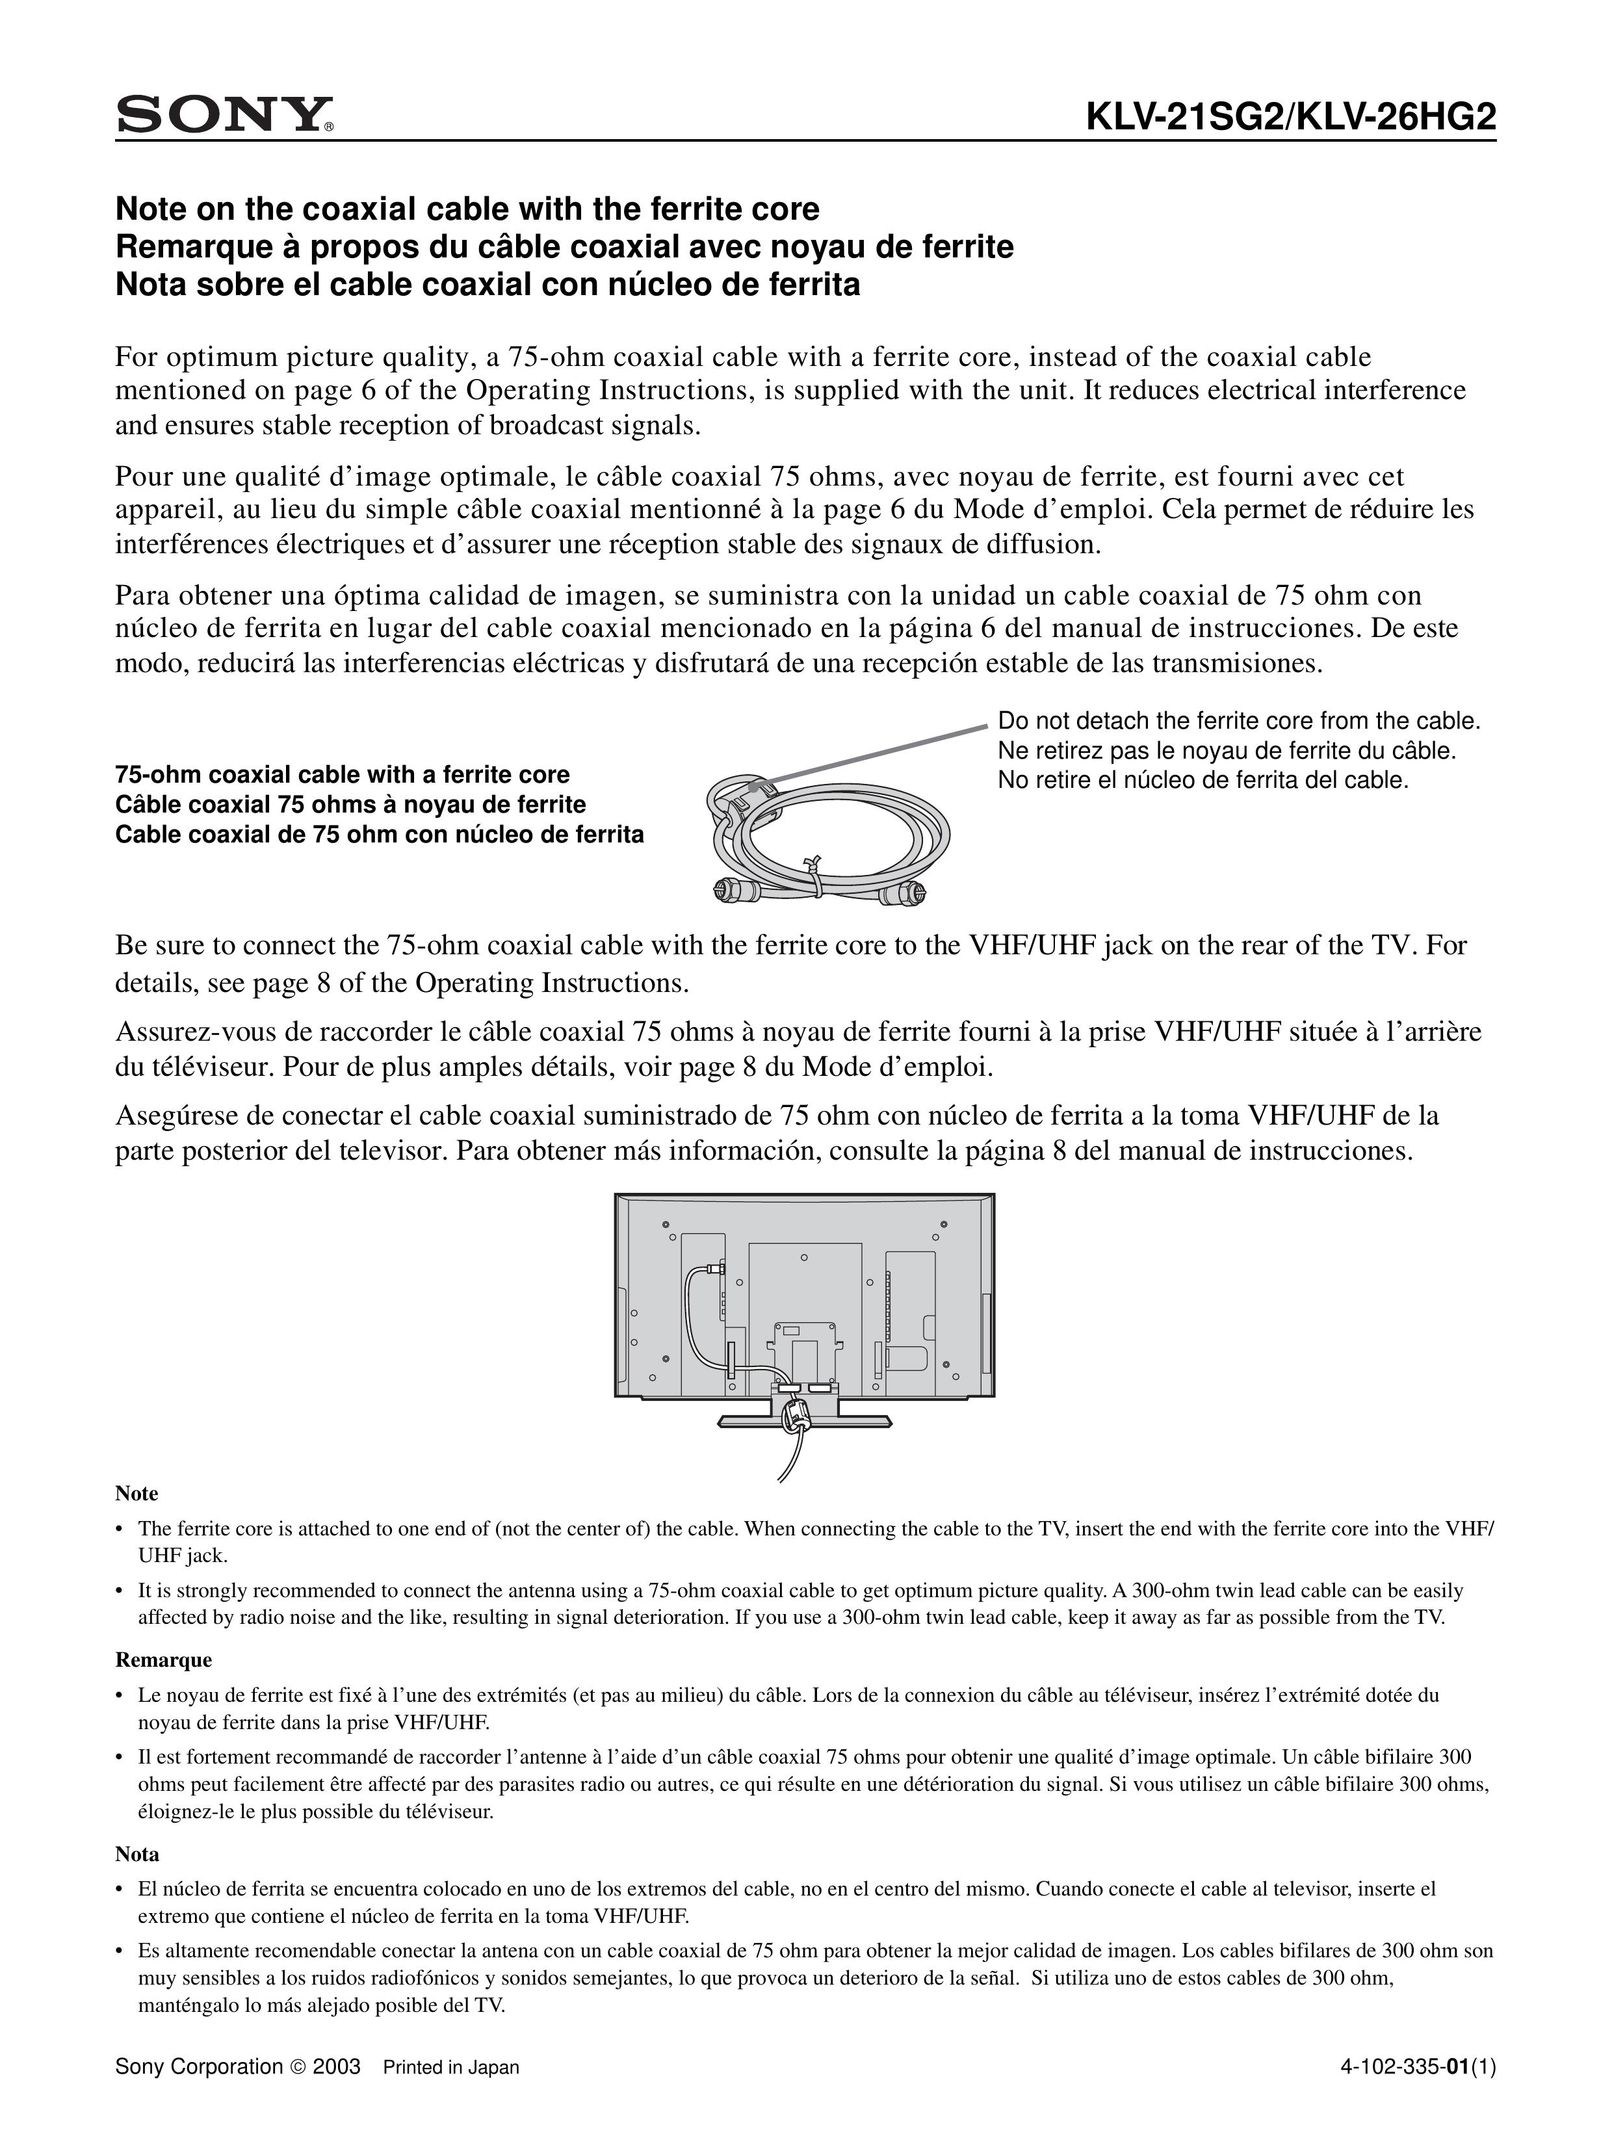 Sony KLV-26HG2 TV Cables User Manual